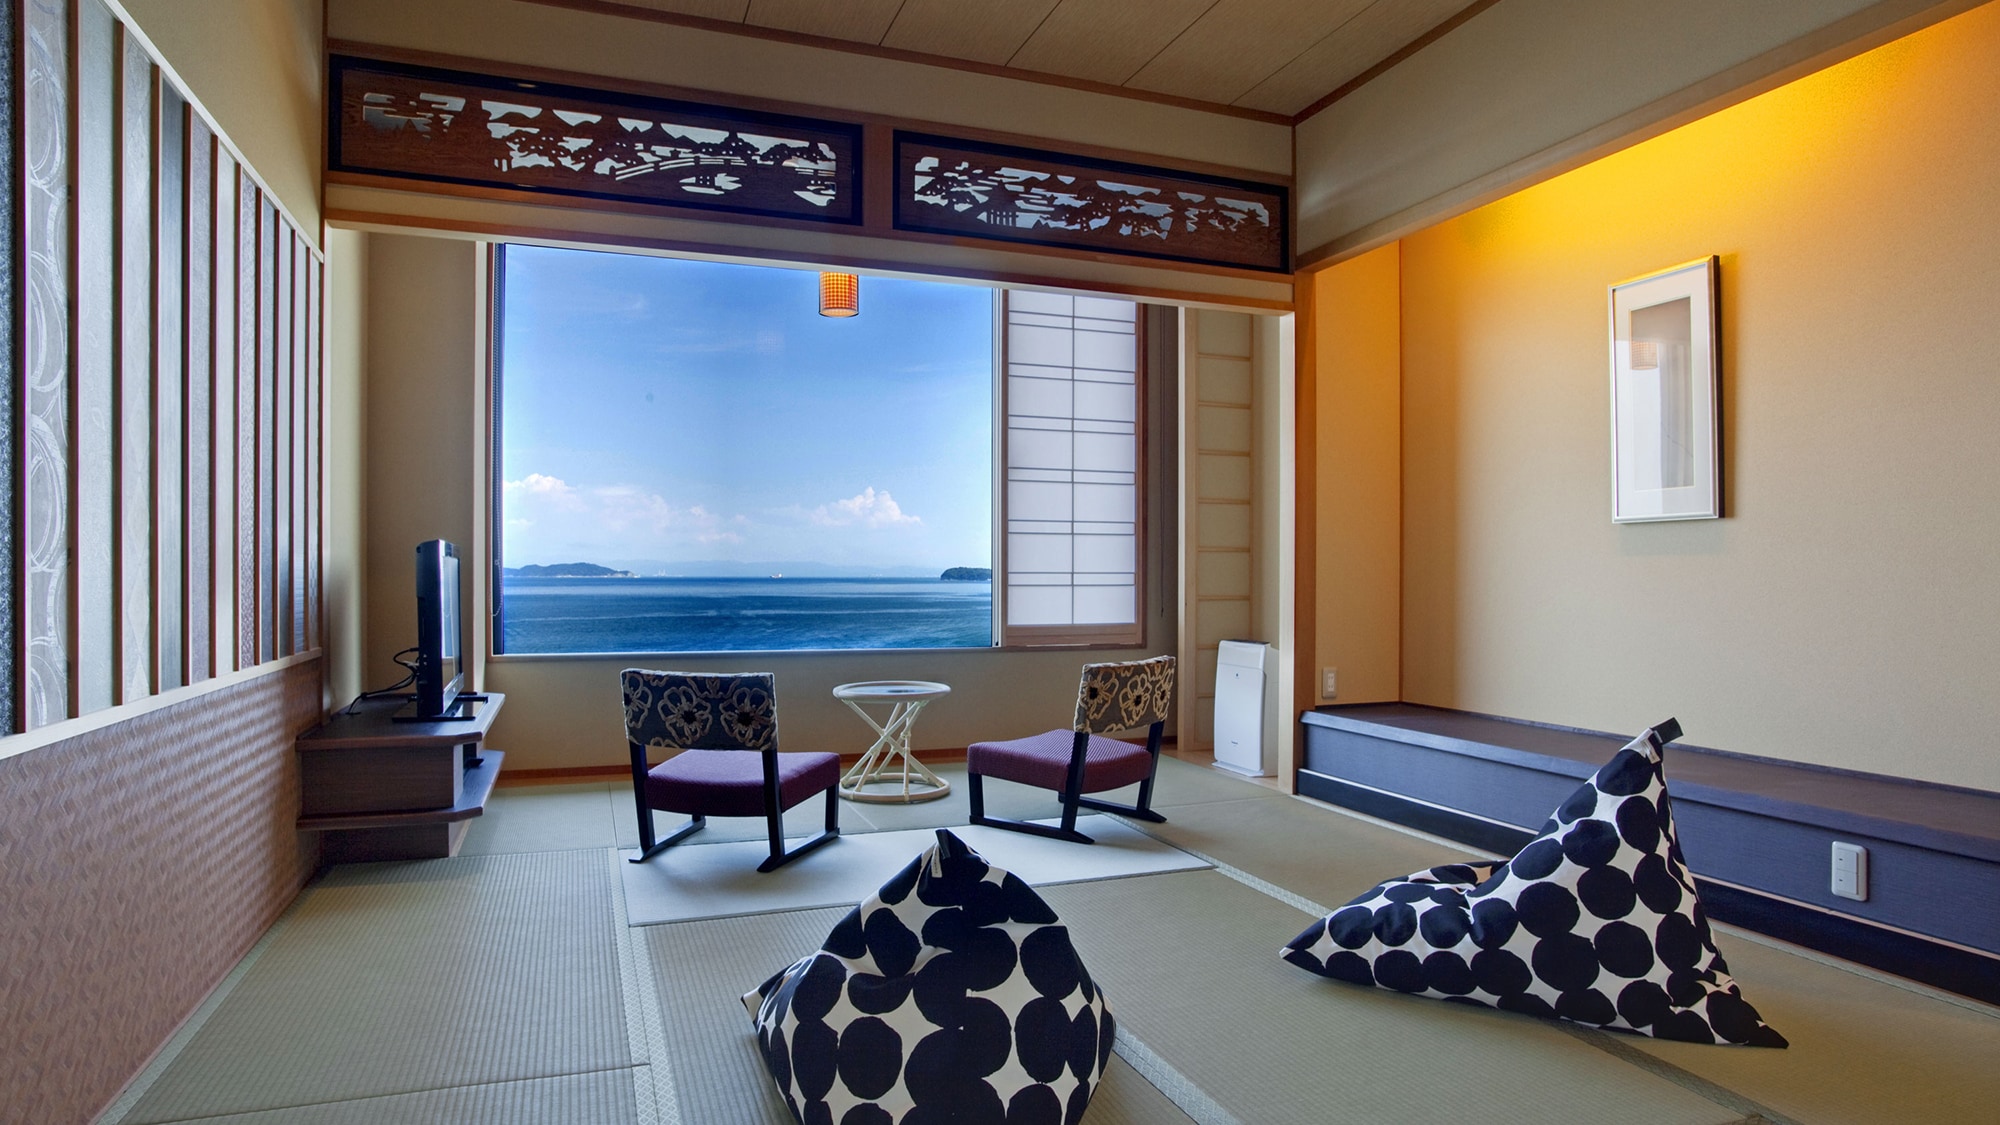 10 Japanese-style rooms with a view of the sea (36 square meters)